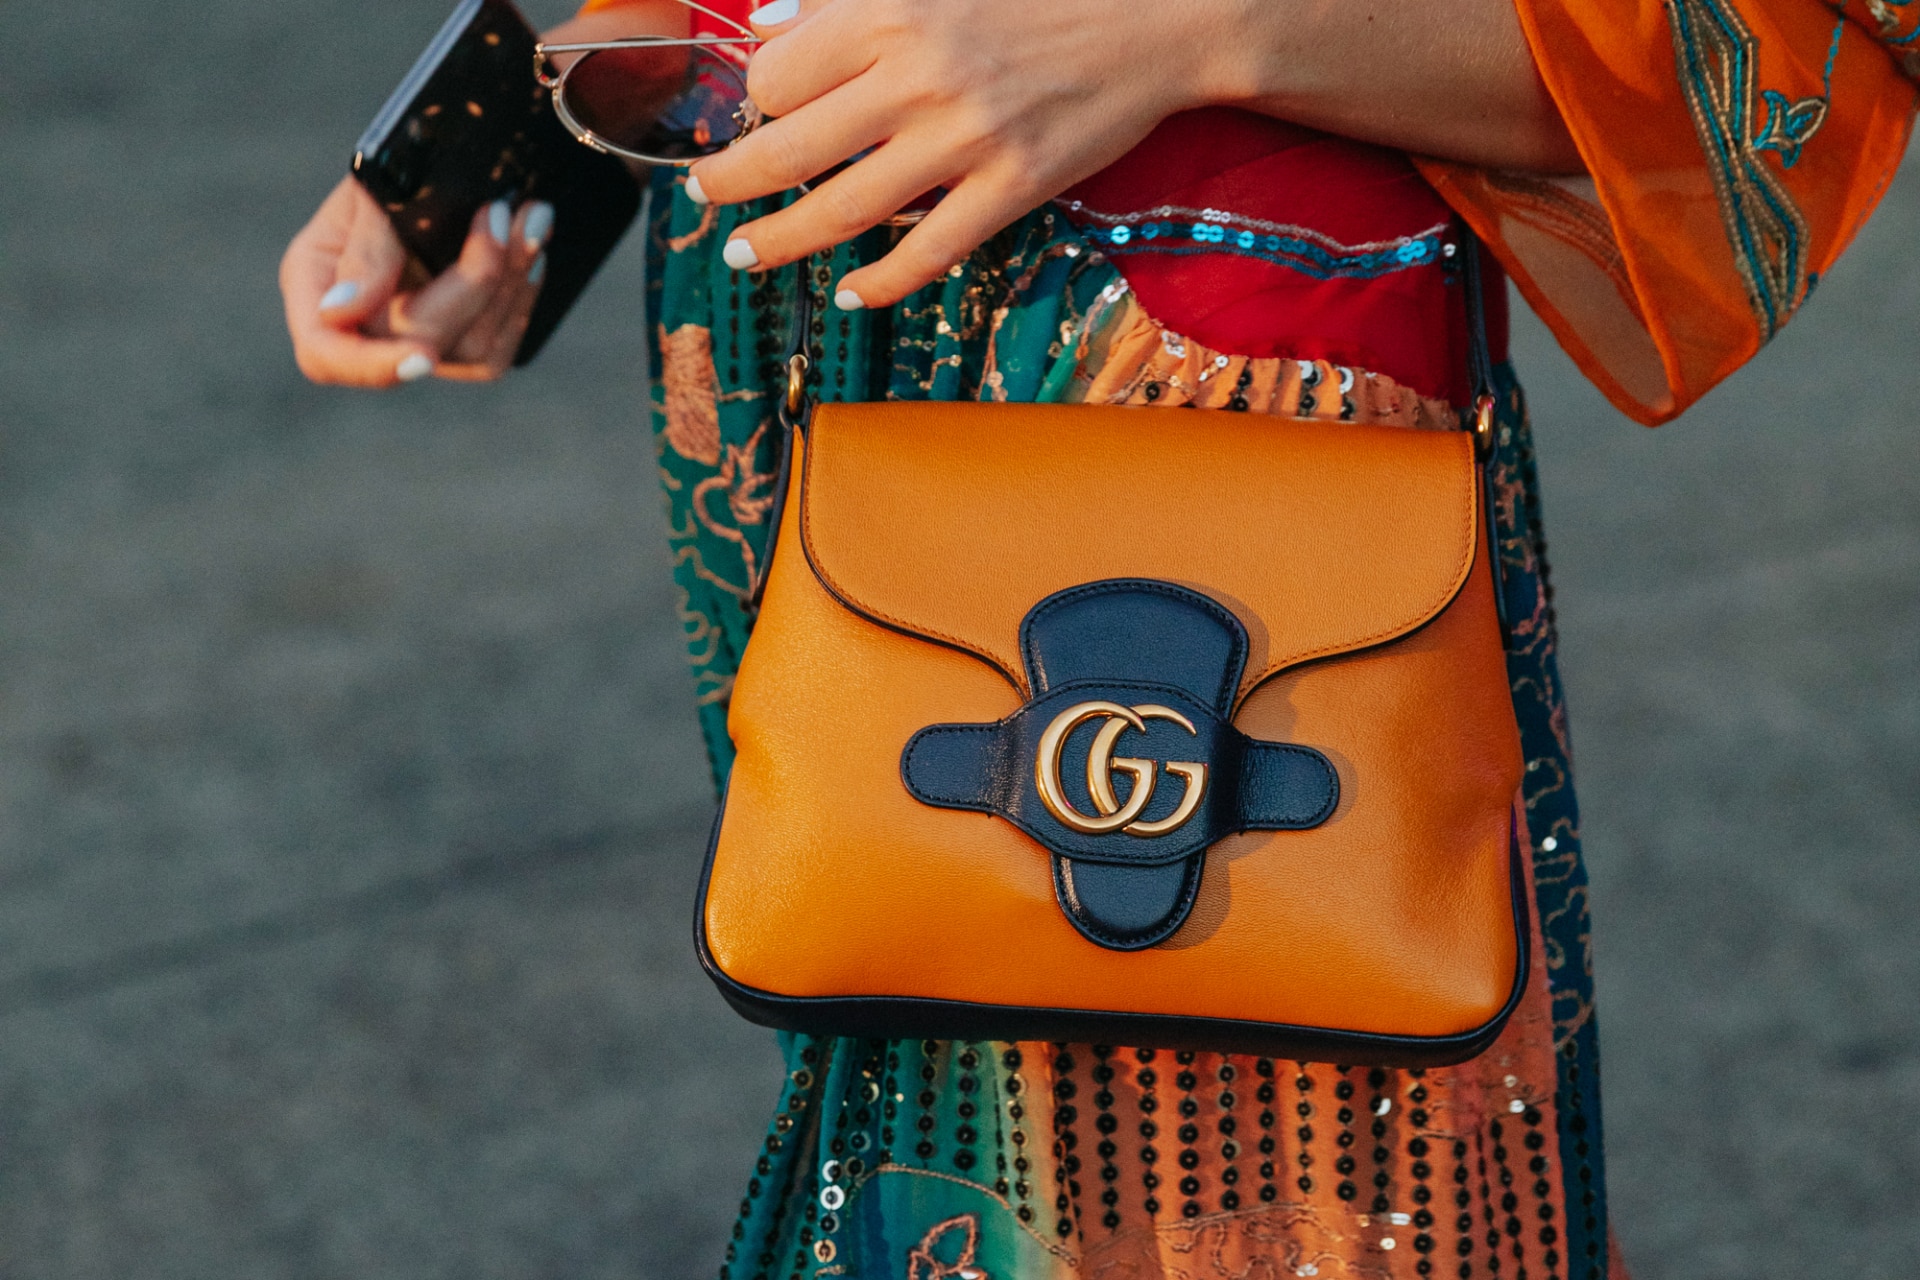 How to tell if a designer bag is vintage